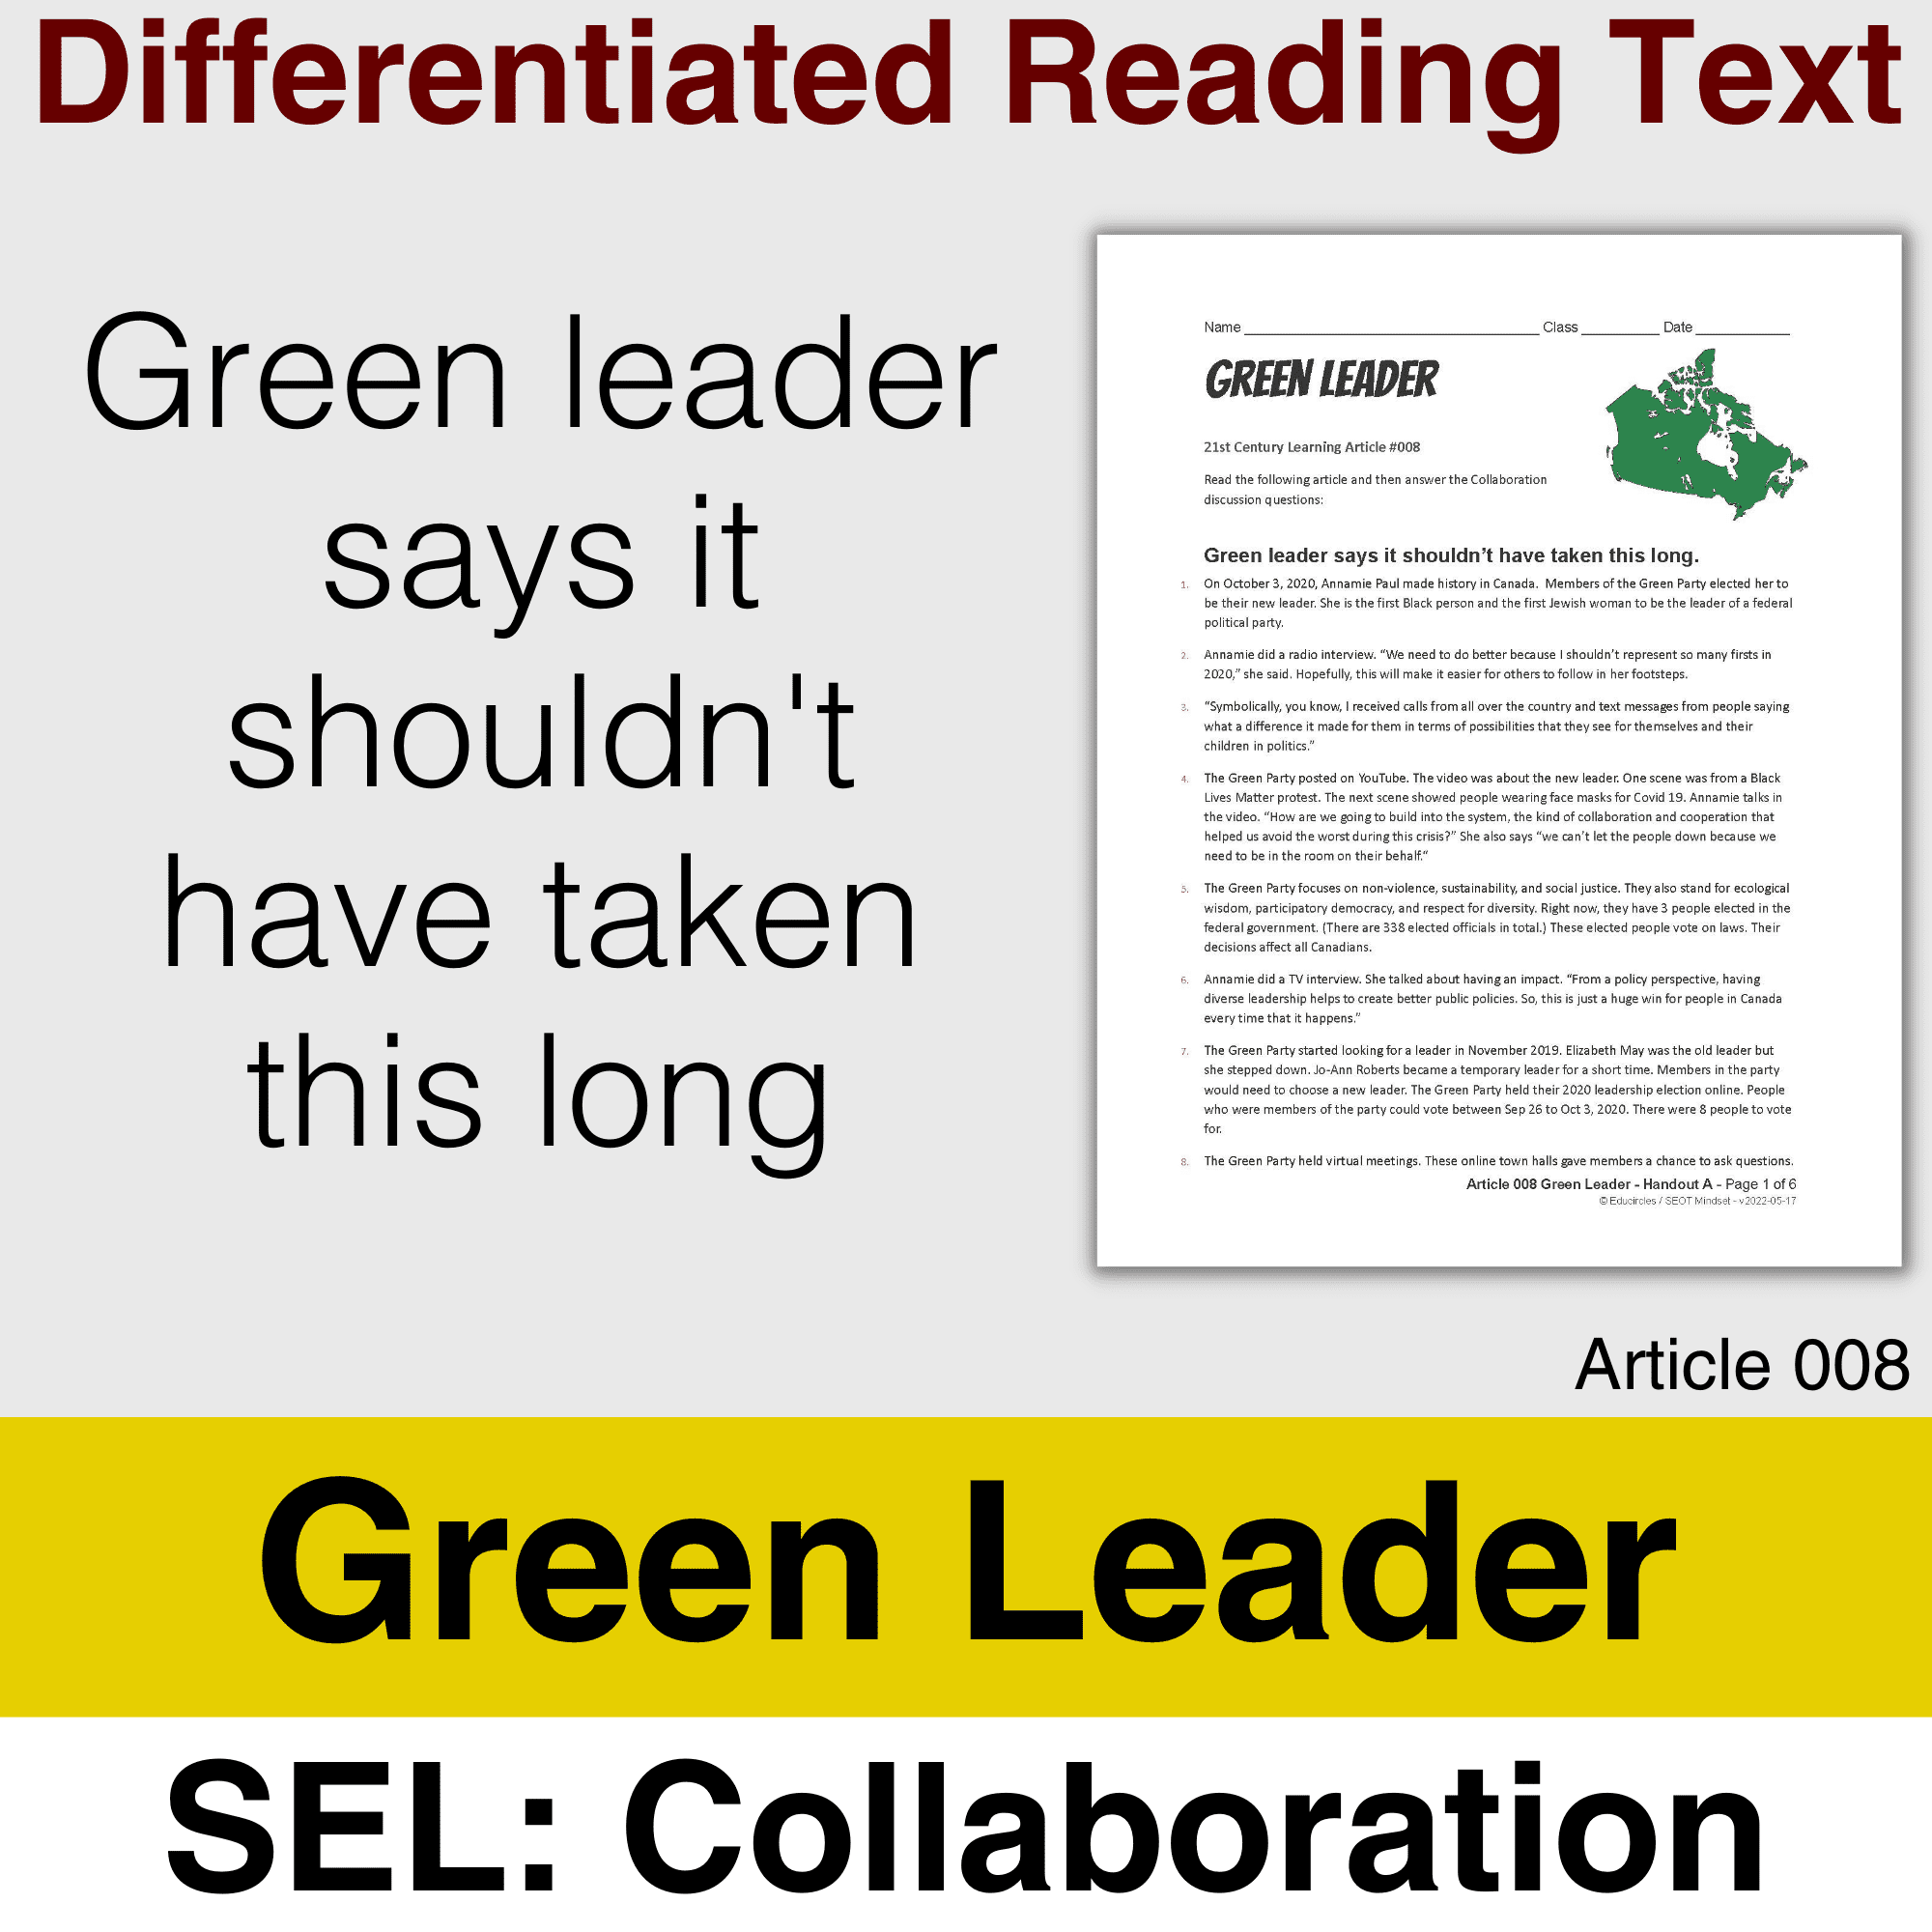 Differentiated Reading Text - Green Leader says it shouldn't have taken this long: SEL: Collaboration